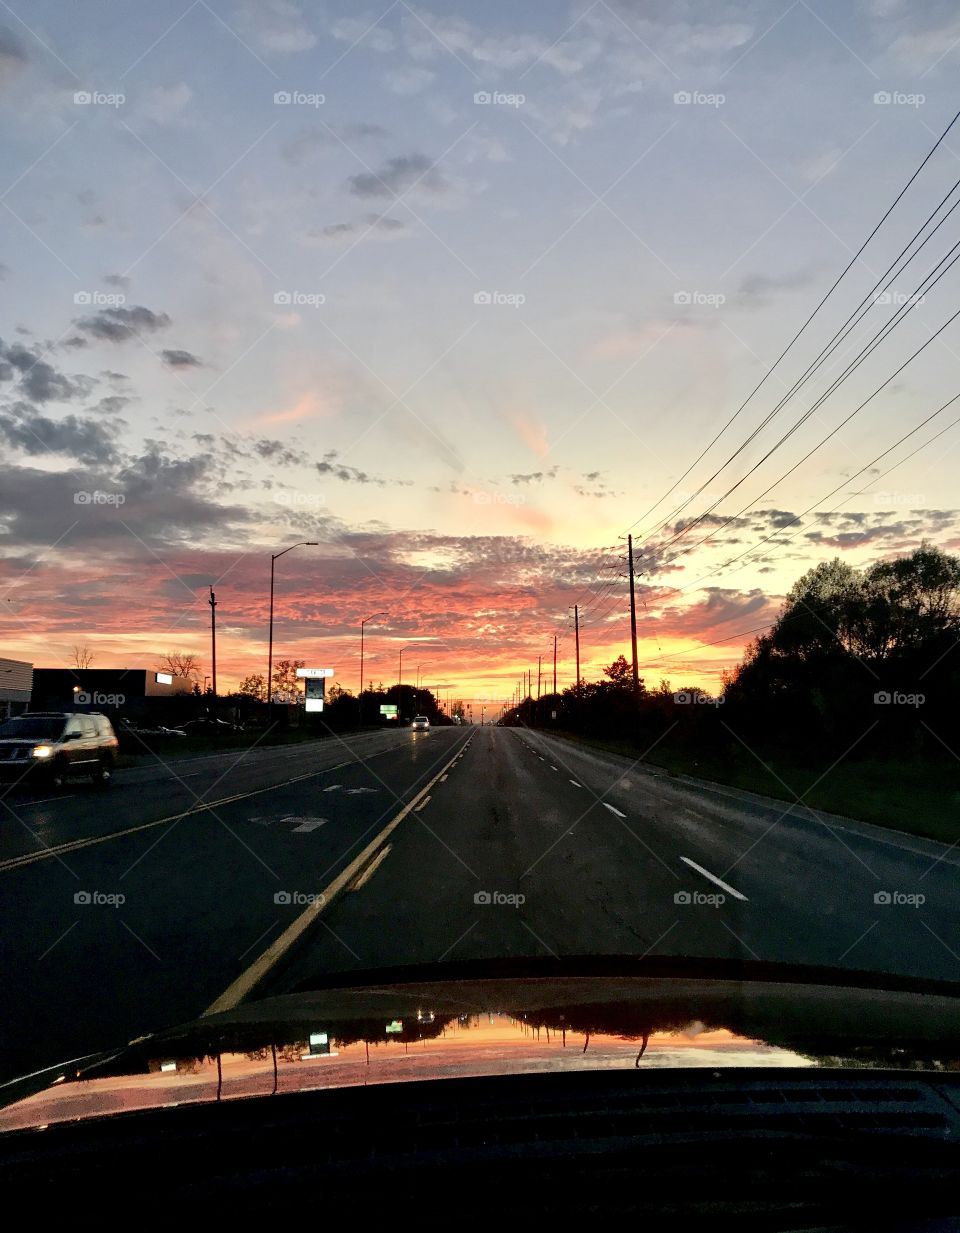 Driving into the red sunset 